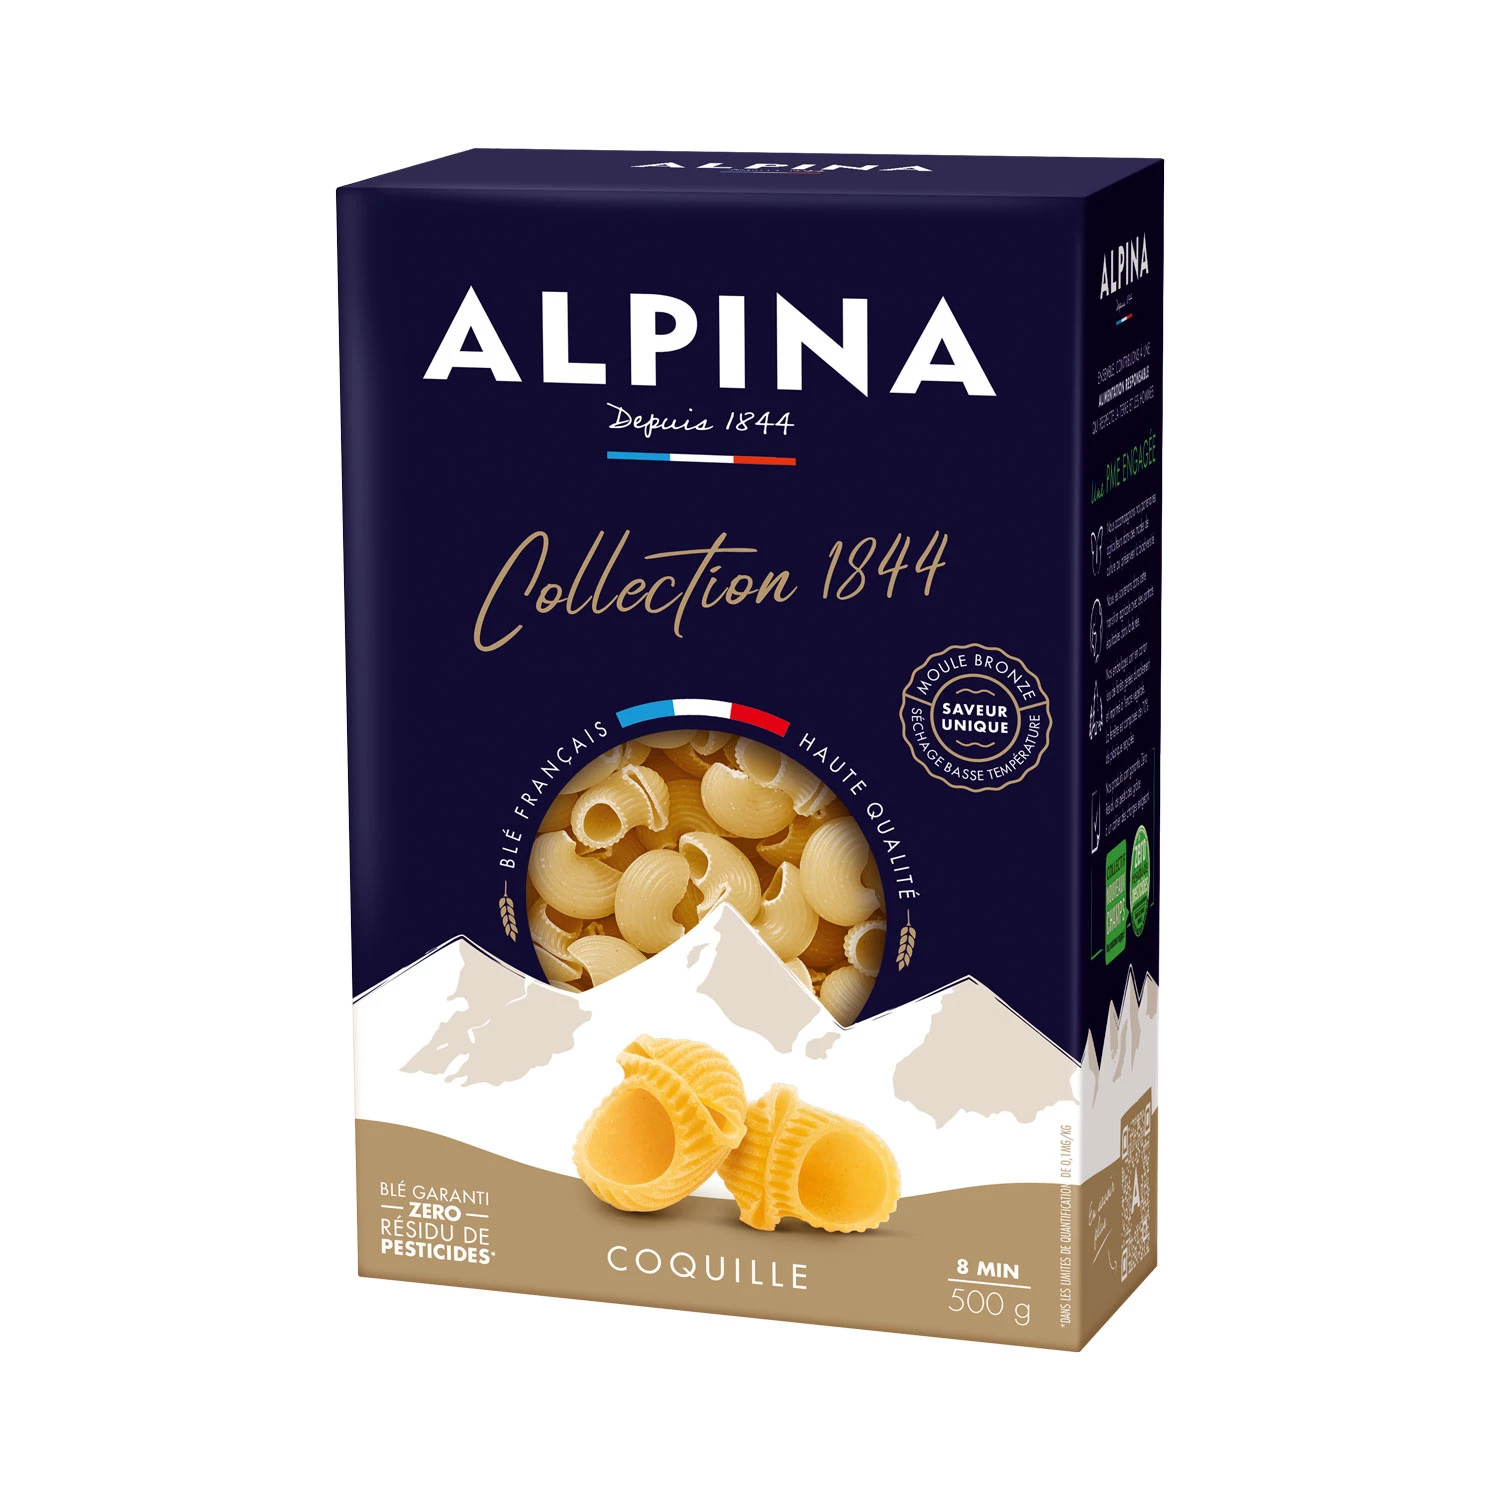 Coquille La Collection, 500g - ALPINA